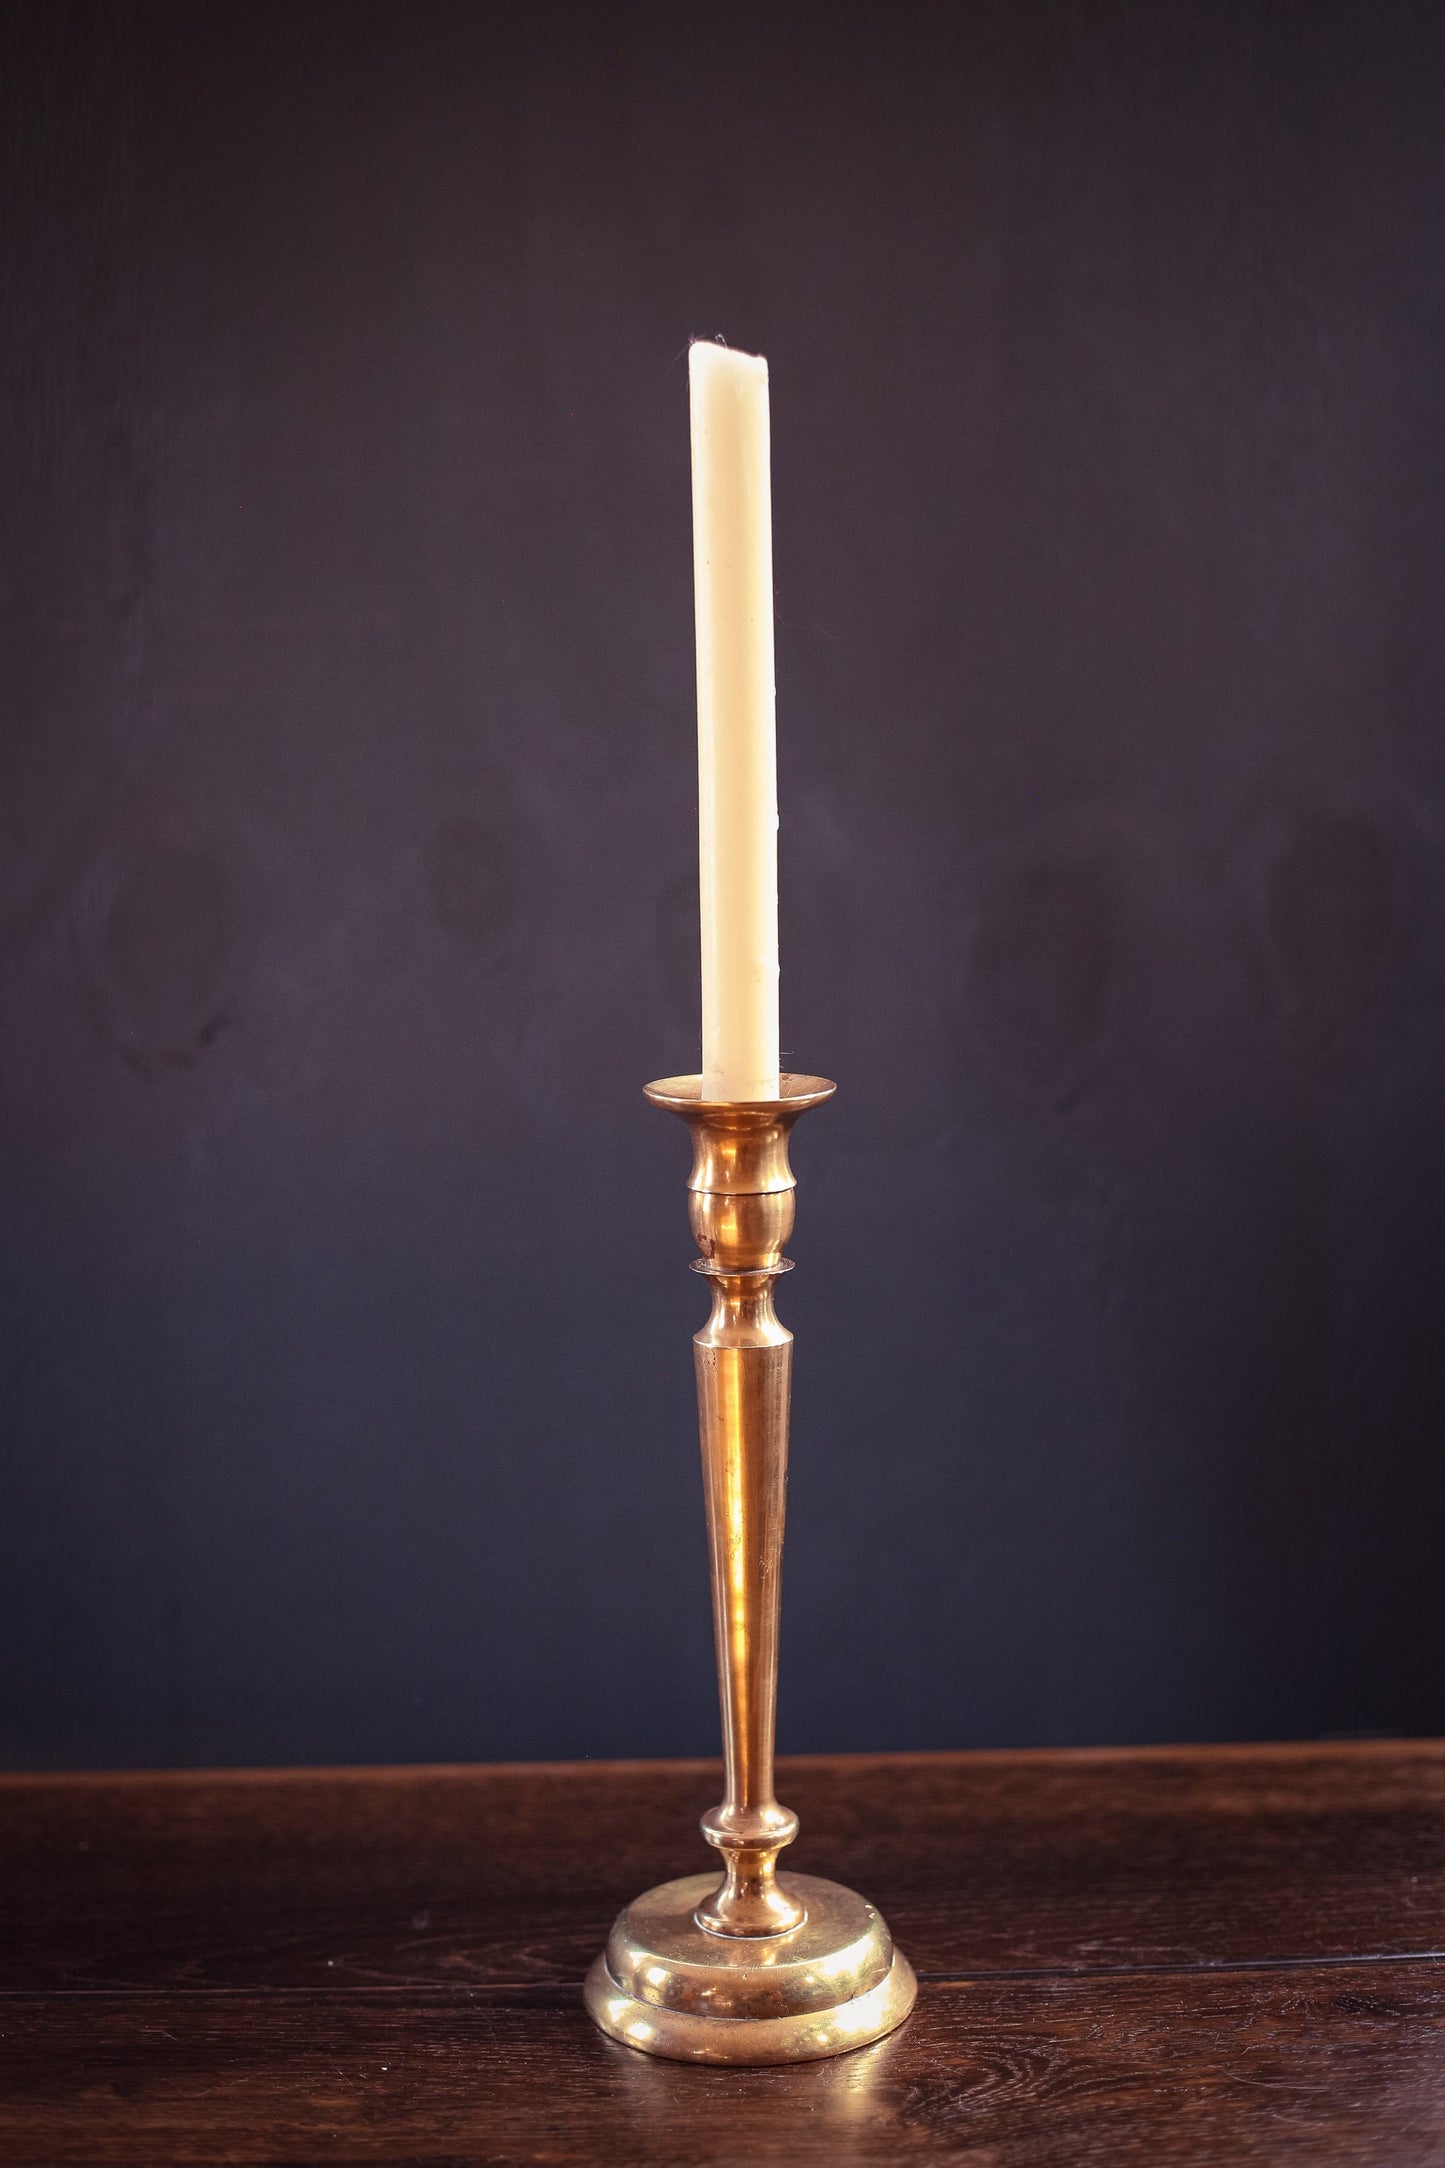 Tall Solid Brass Candle Holder - Vintage Midcentury Modern Brass Candle Base